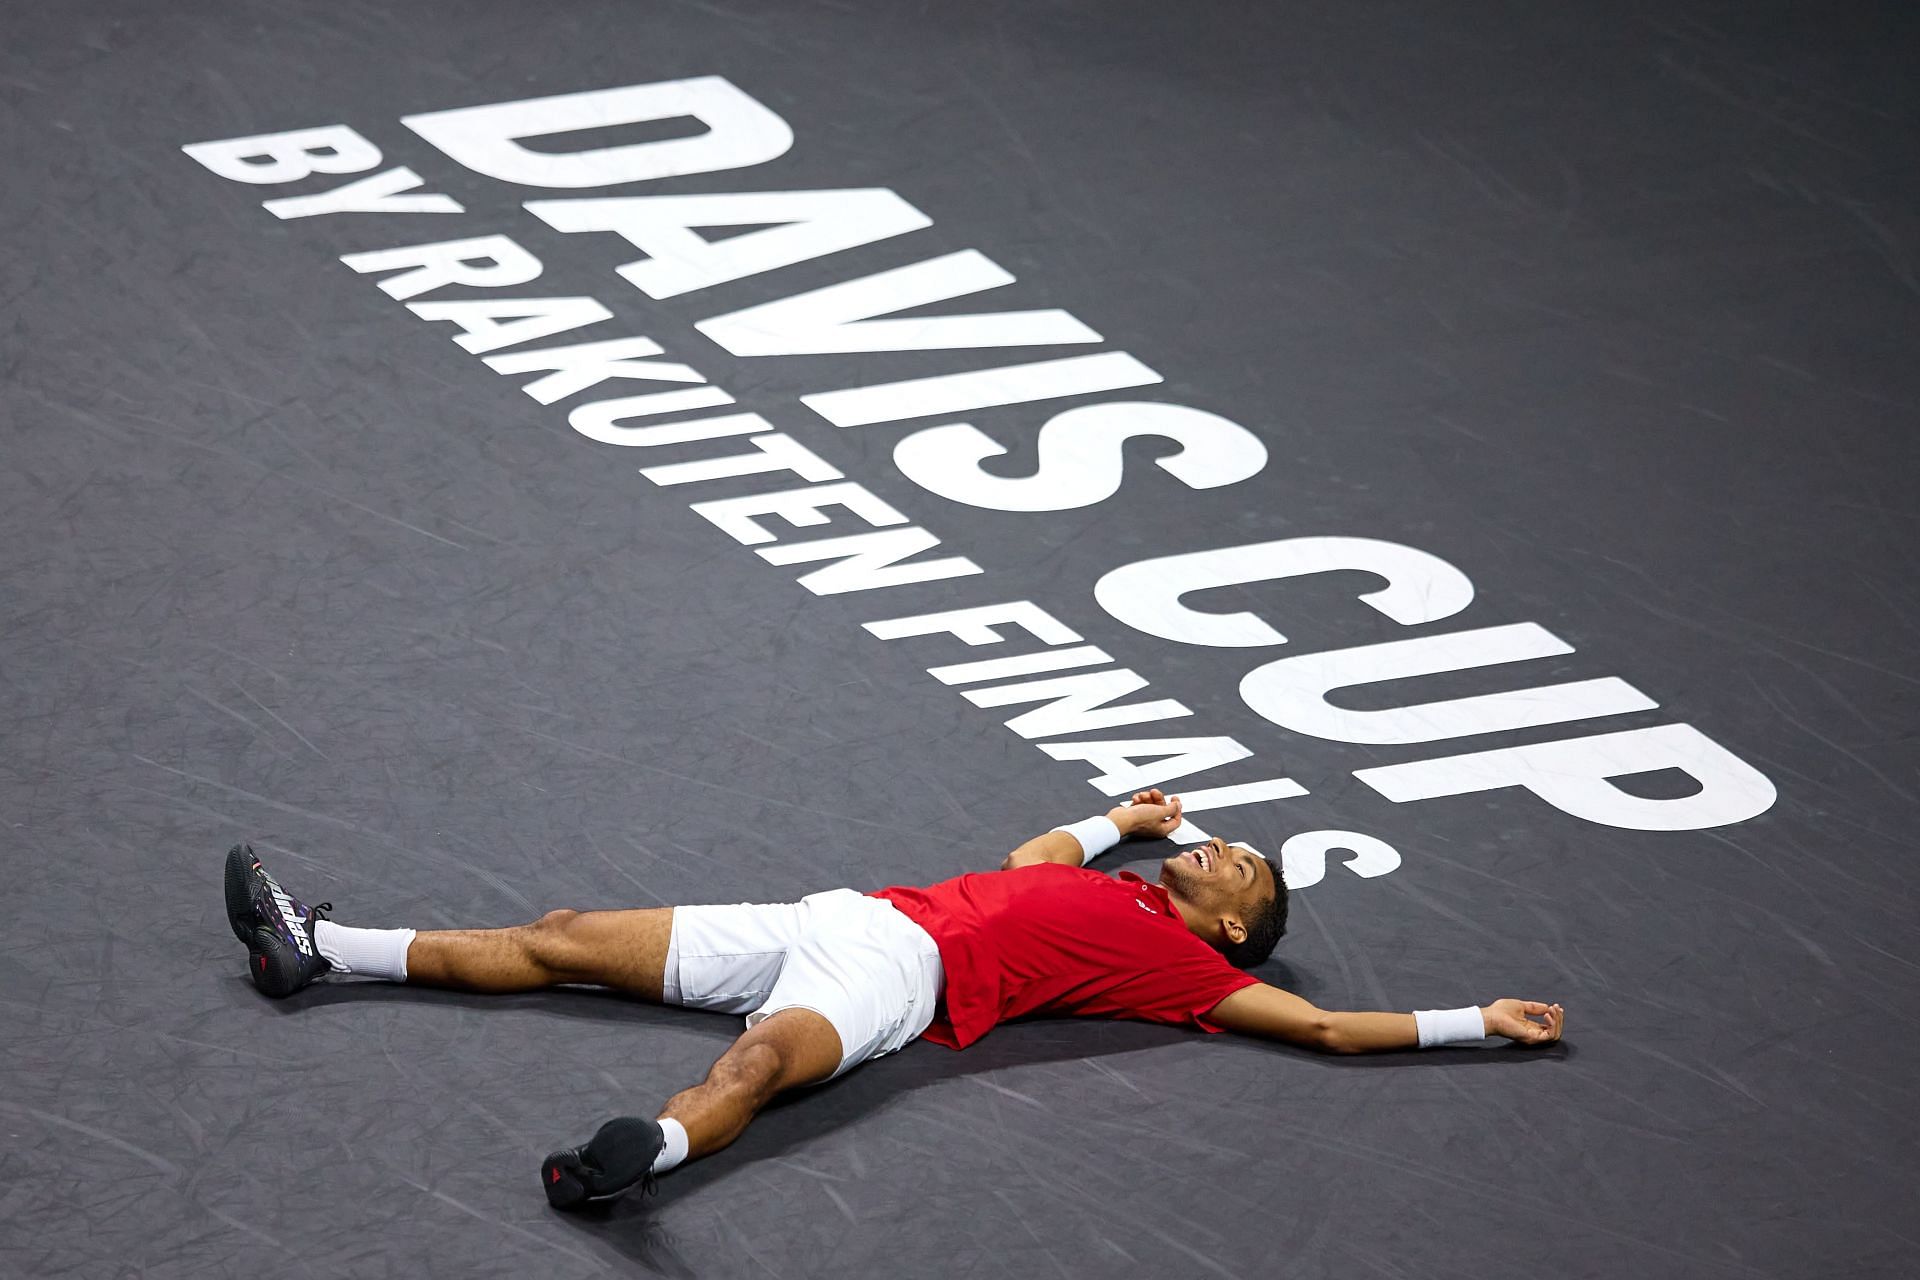 Felix Auger-Aliassime clinches the title for Canada in the Davis Cup last Sunday.